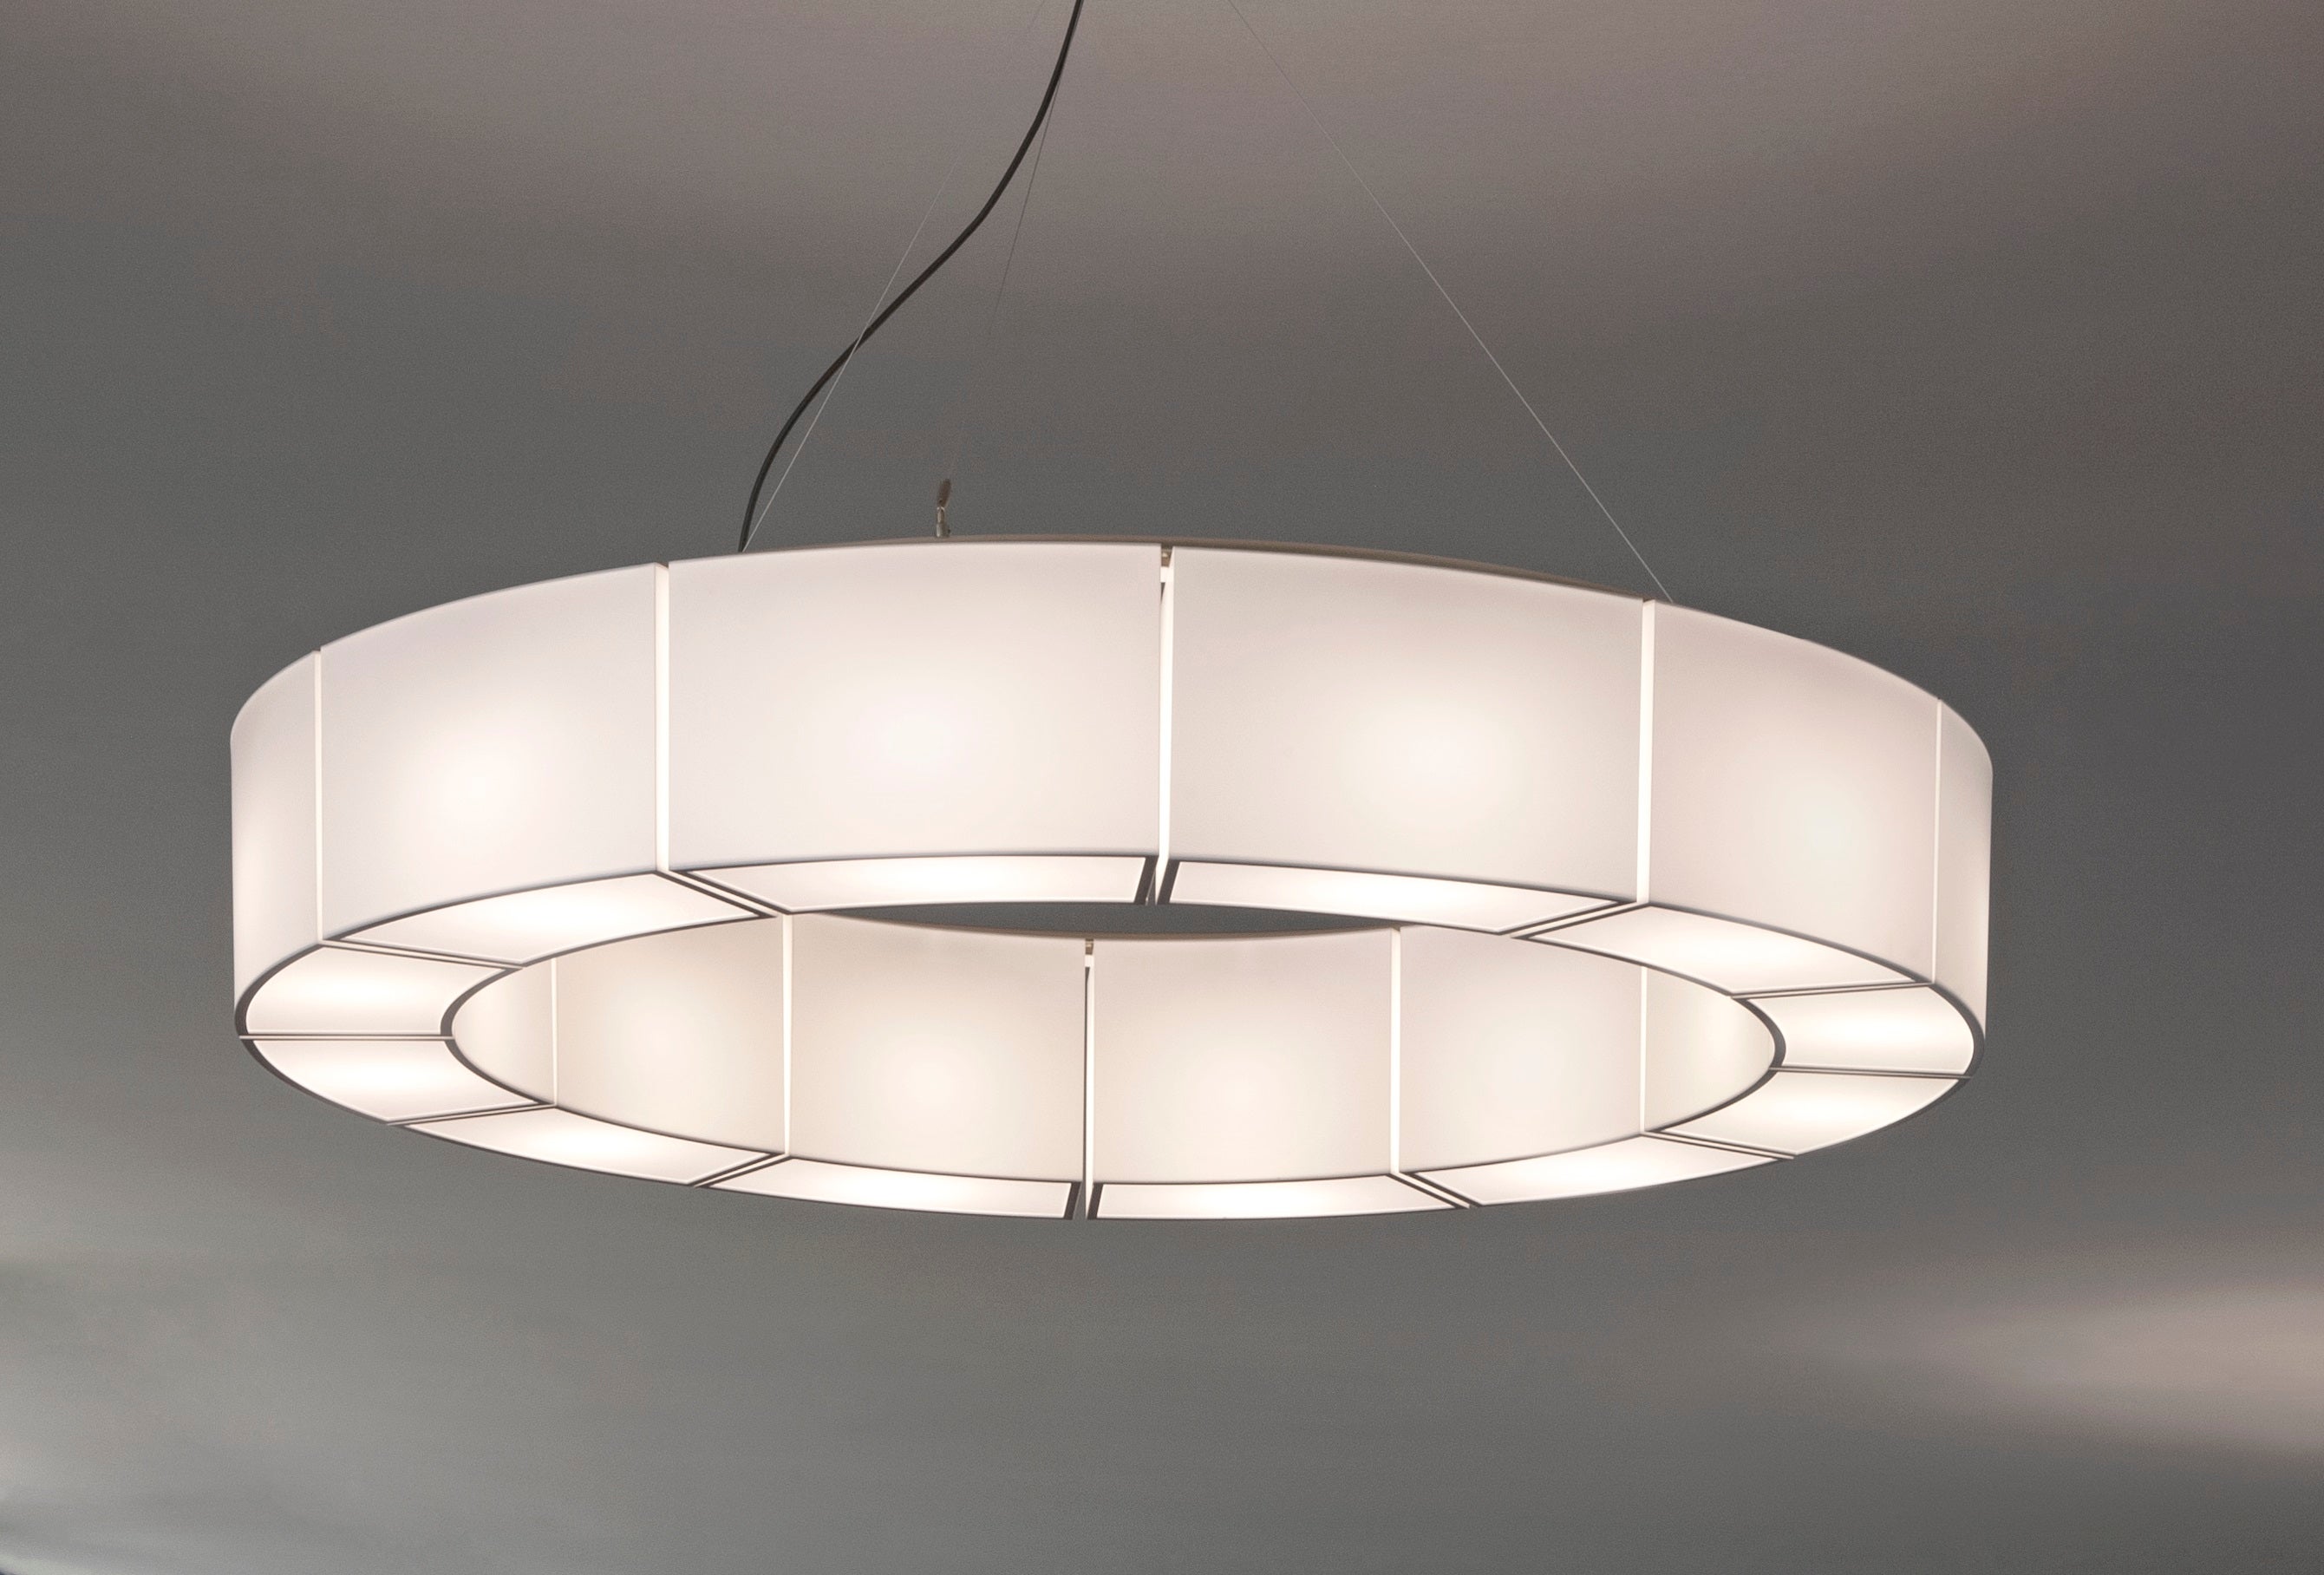 Sexta 12 pendant lamp by Miguel Milá.
Dimensions: D 128 x H 20 cm.
Materials: Metal, PVC, opal translucent methacrylate diffusers.
Available with or without opal translucent methacrylate diffusers.

This circle of double-sided shades produces a